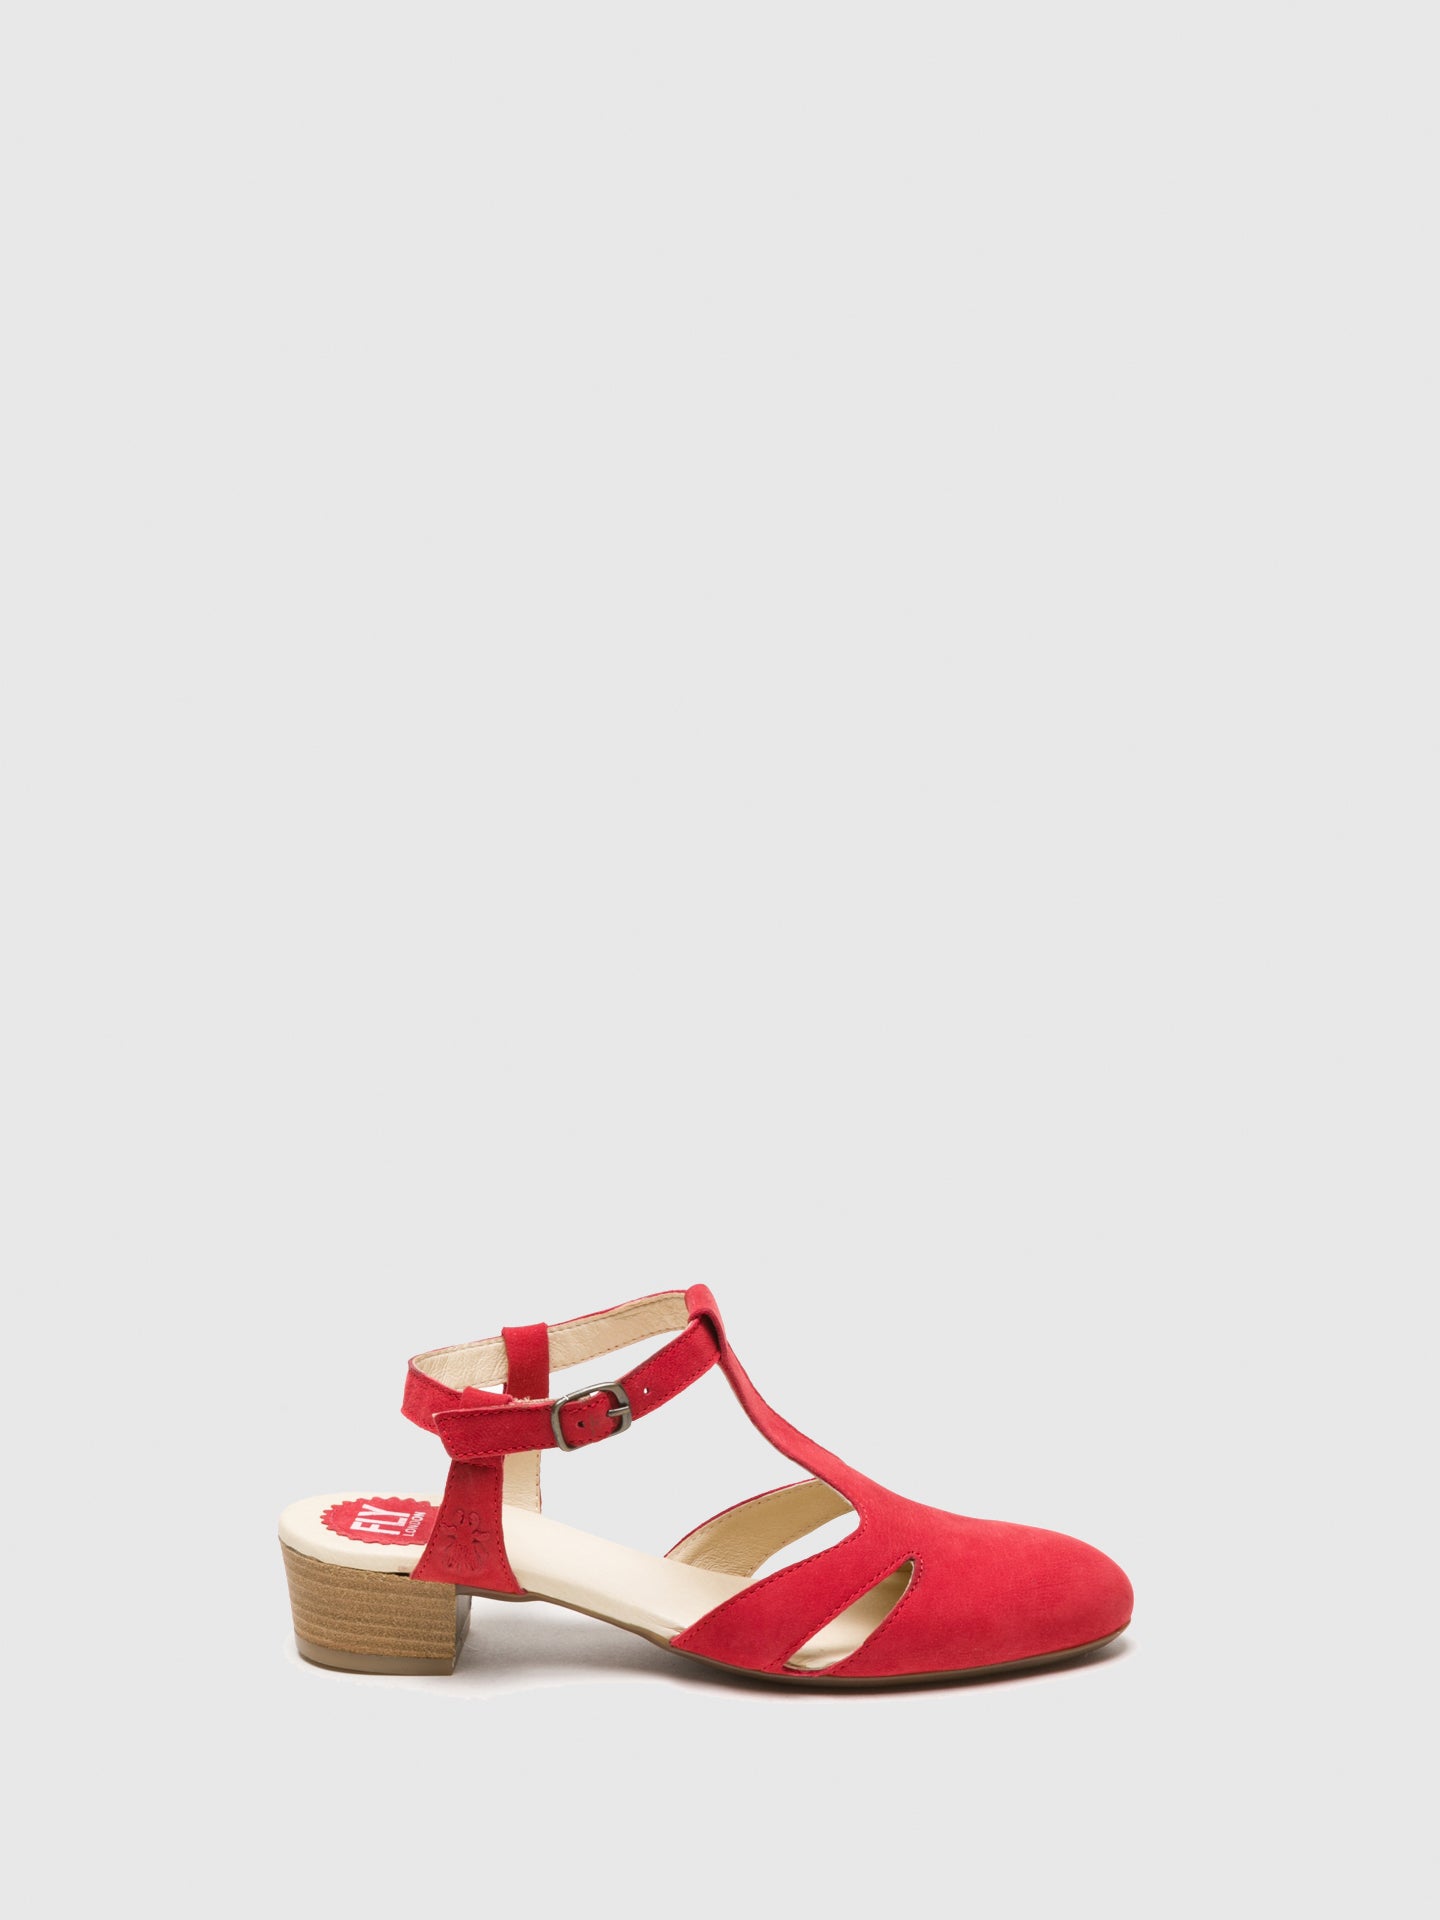 Fly London Red T-Strap Sandals